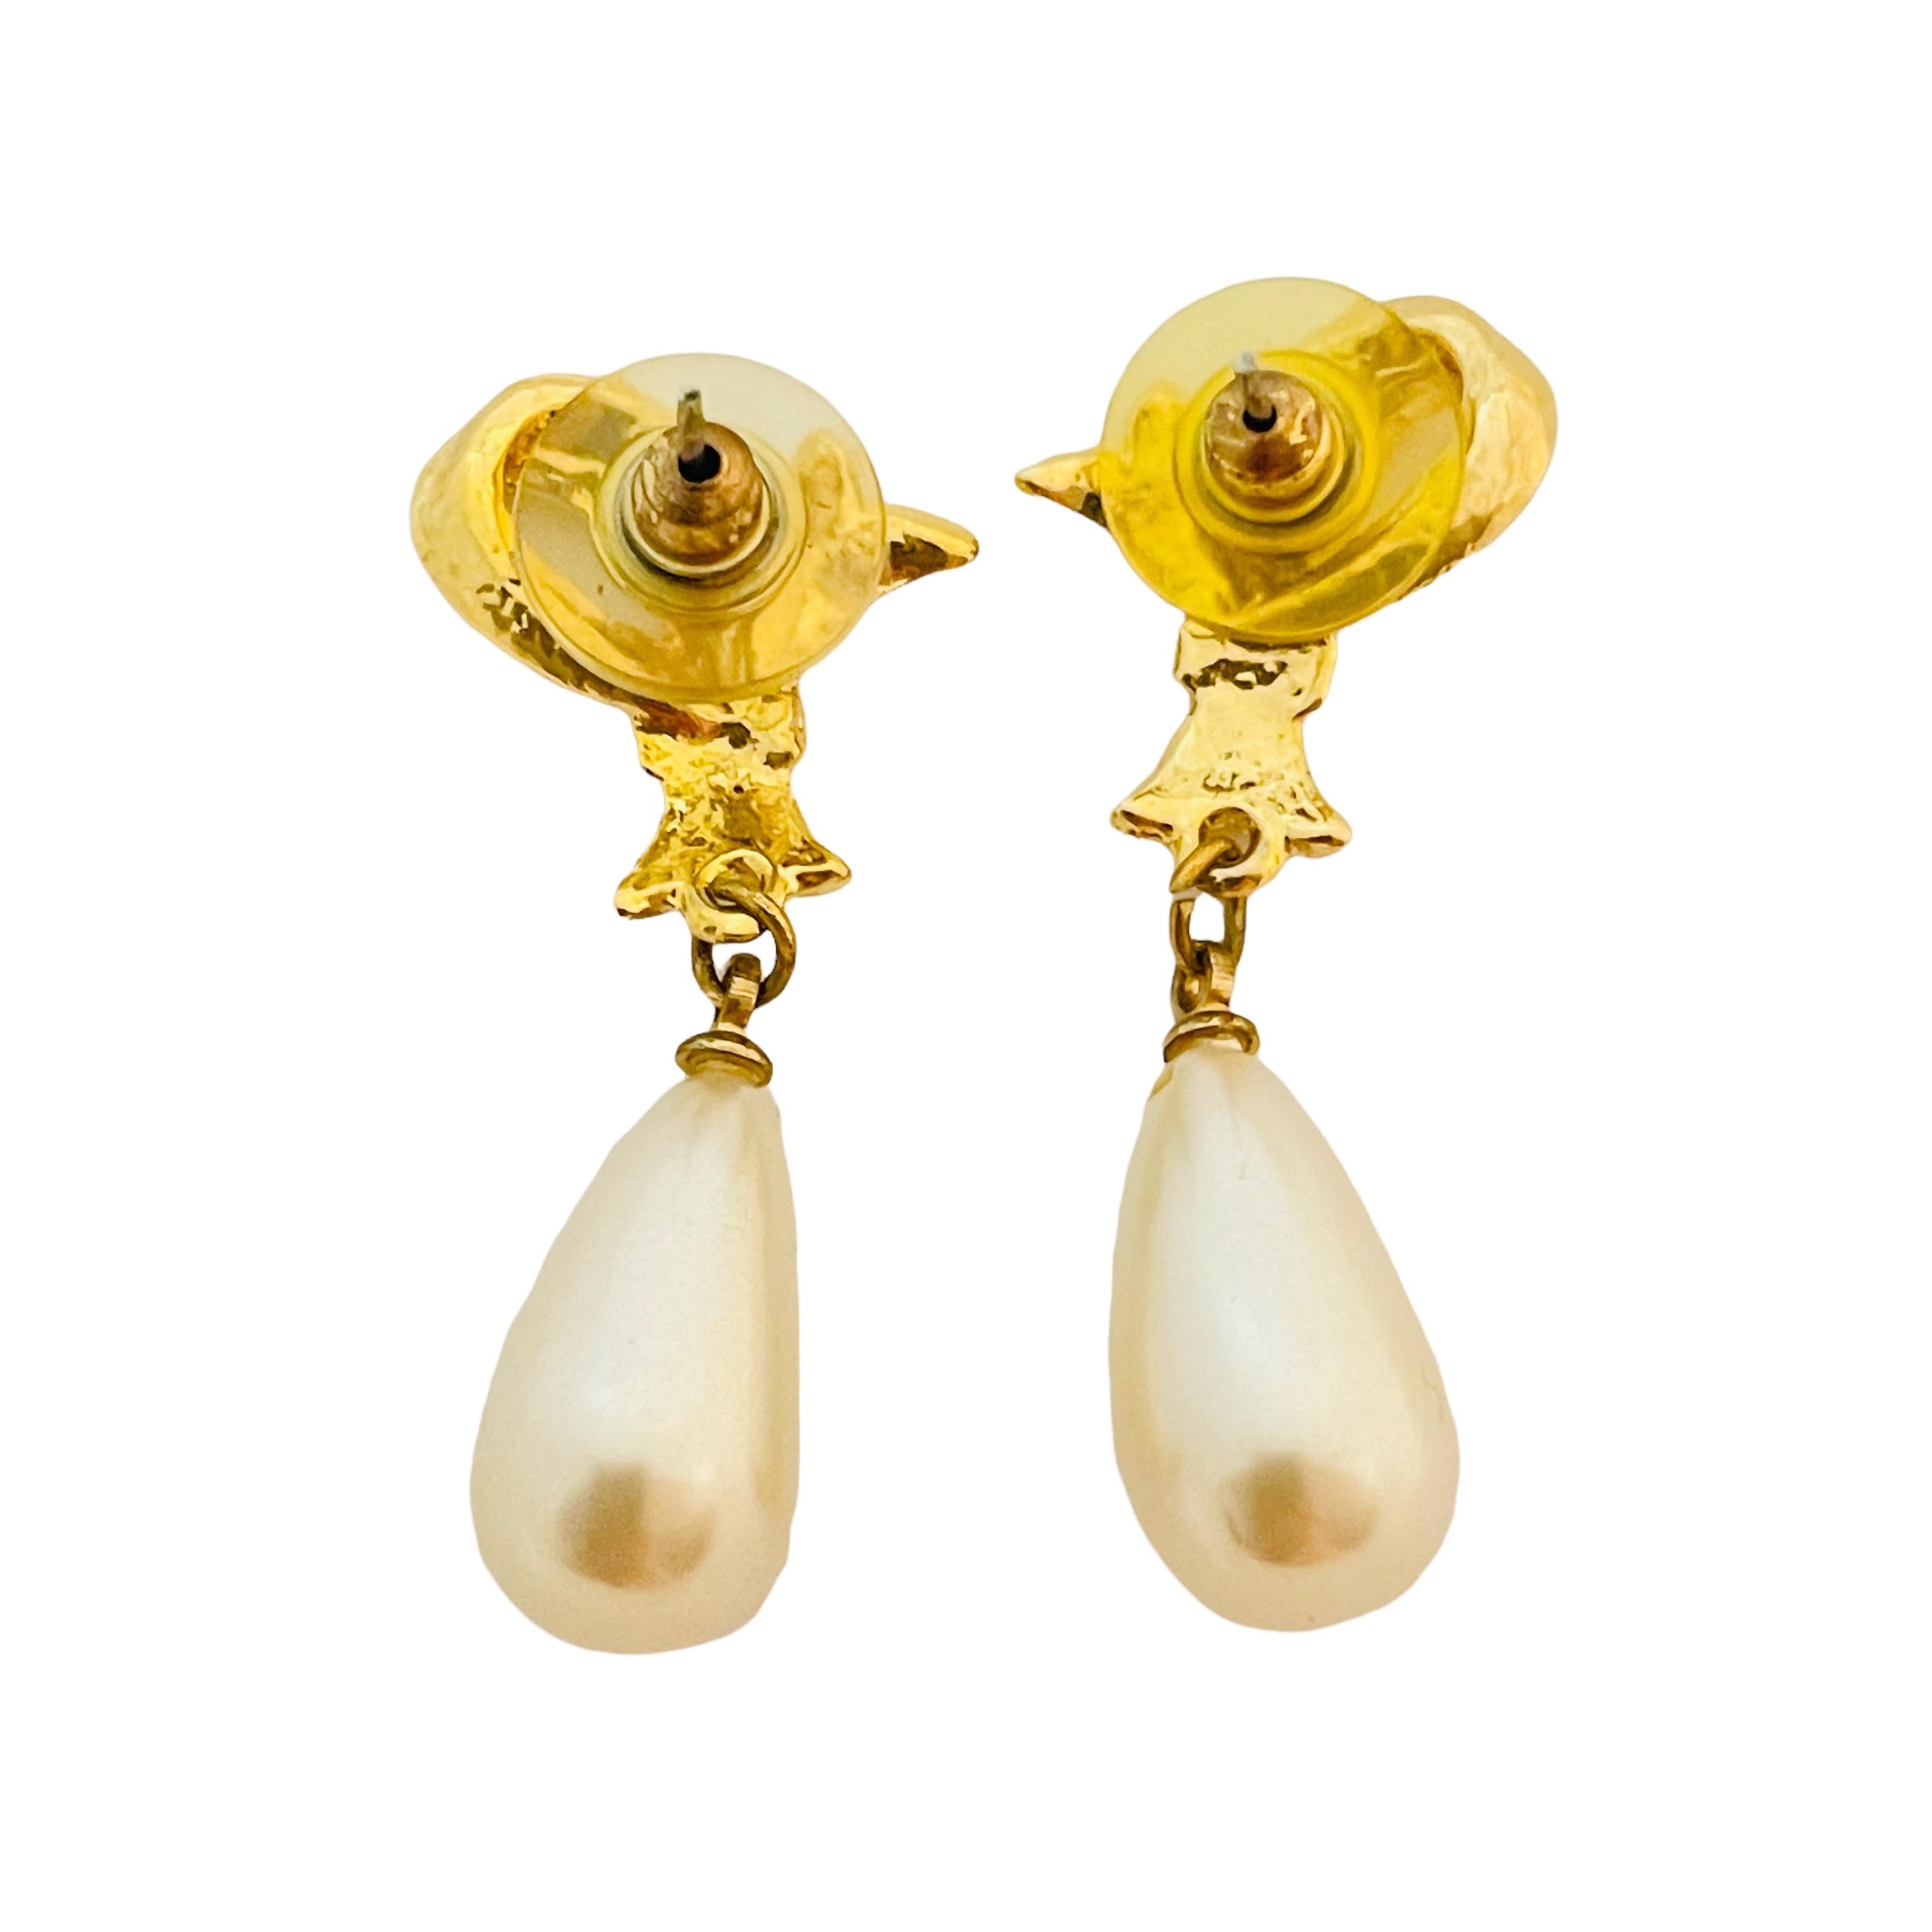 Vtg gold rhinestone pearl drop earrings designer runway In Good Condition For Sale In Palos Hills, IL